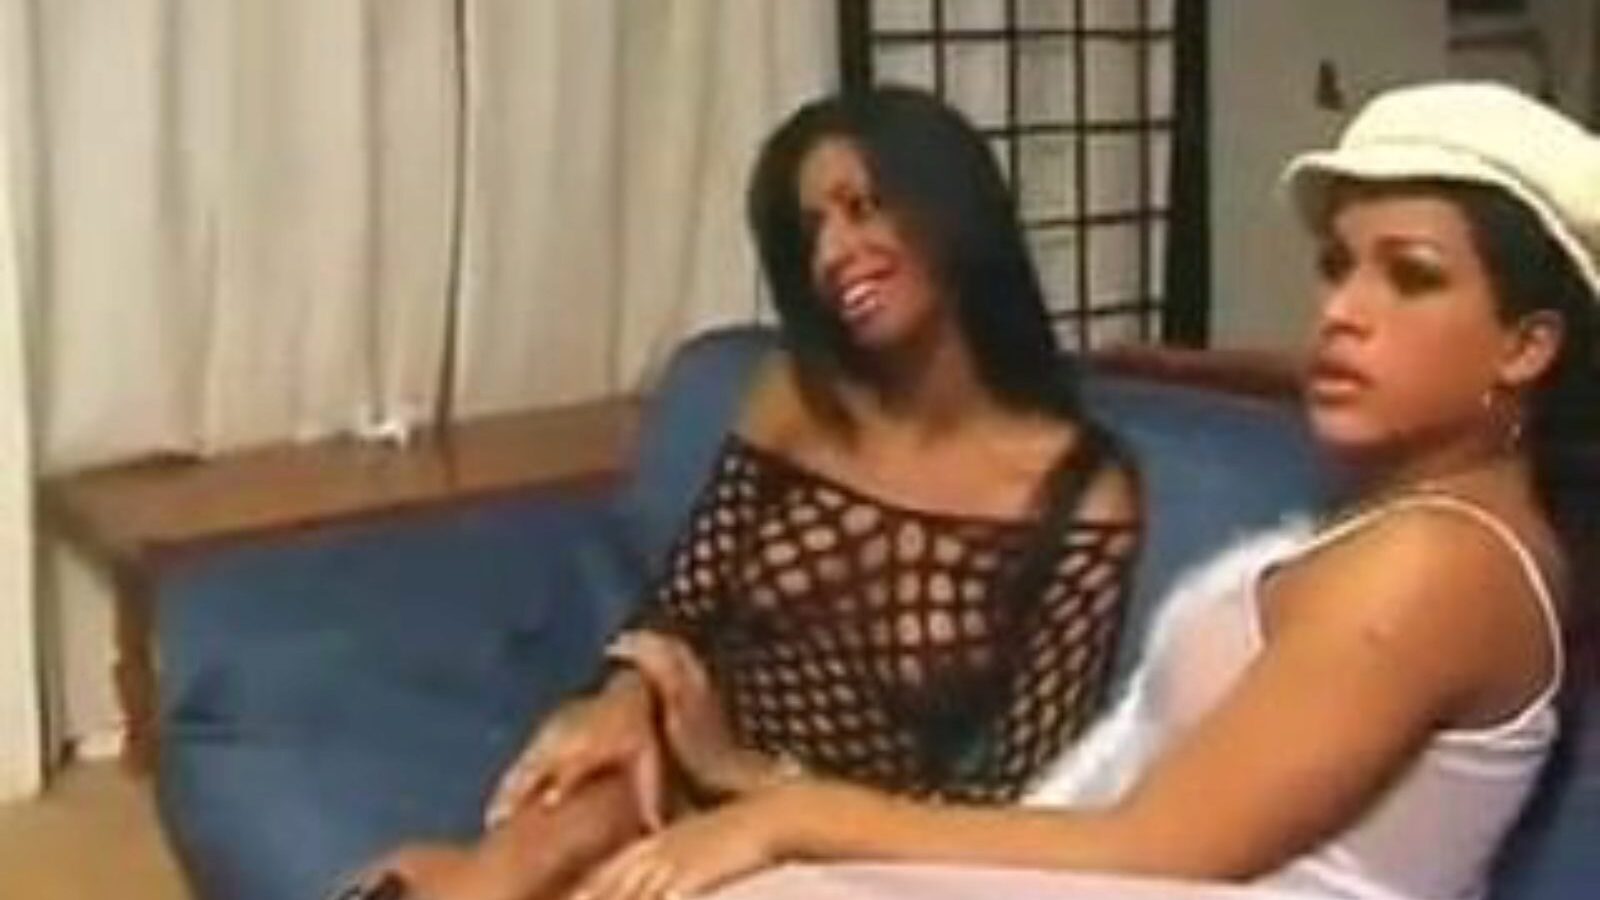 two Hot Trannies: Free Hawt Ladyboy Porn Episode d5 - xHamster See 2 Hawt Shemales tgirl fuckfest movie for free-for-all on xHamster - the astounding bevy of Hawt Tgirl Tgirl Porn & Large Pointer Sisters porn video sequences